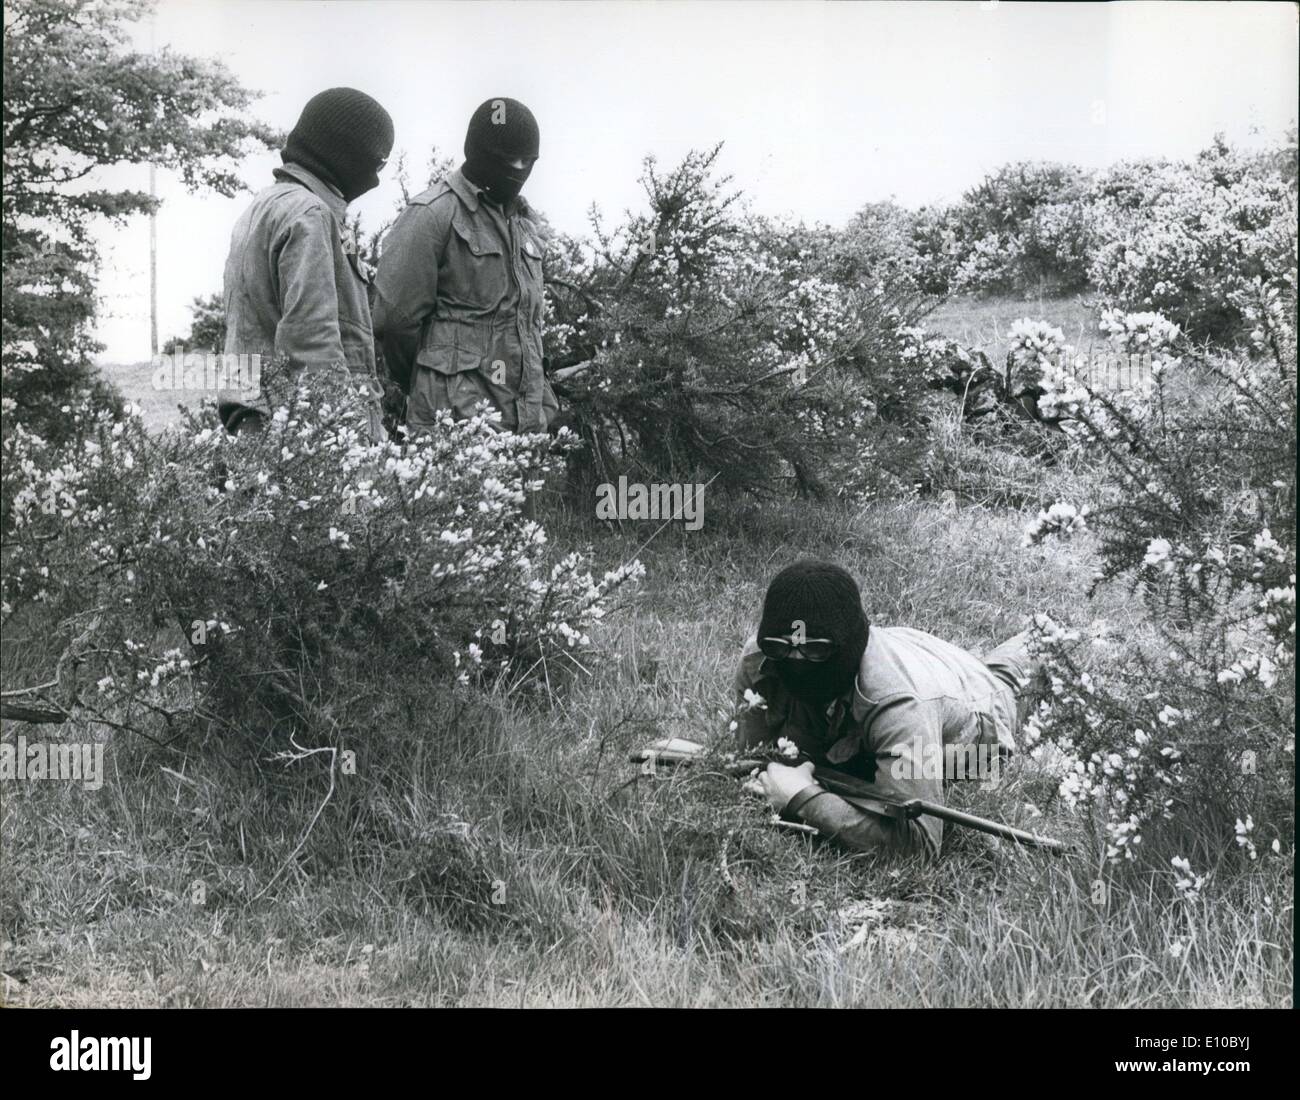 Jun. 06, 1972 - Members of the militant Protestant Ulster Defense Association have recently begun guerilla-warfare training in a secluded camp on the outskirts of Ulster. Stock Photo